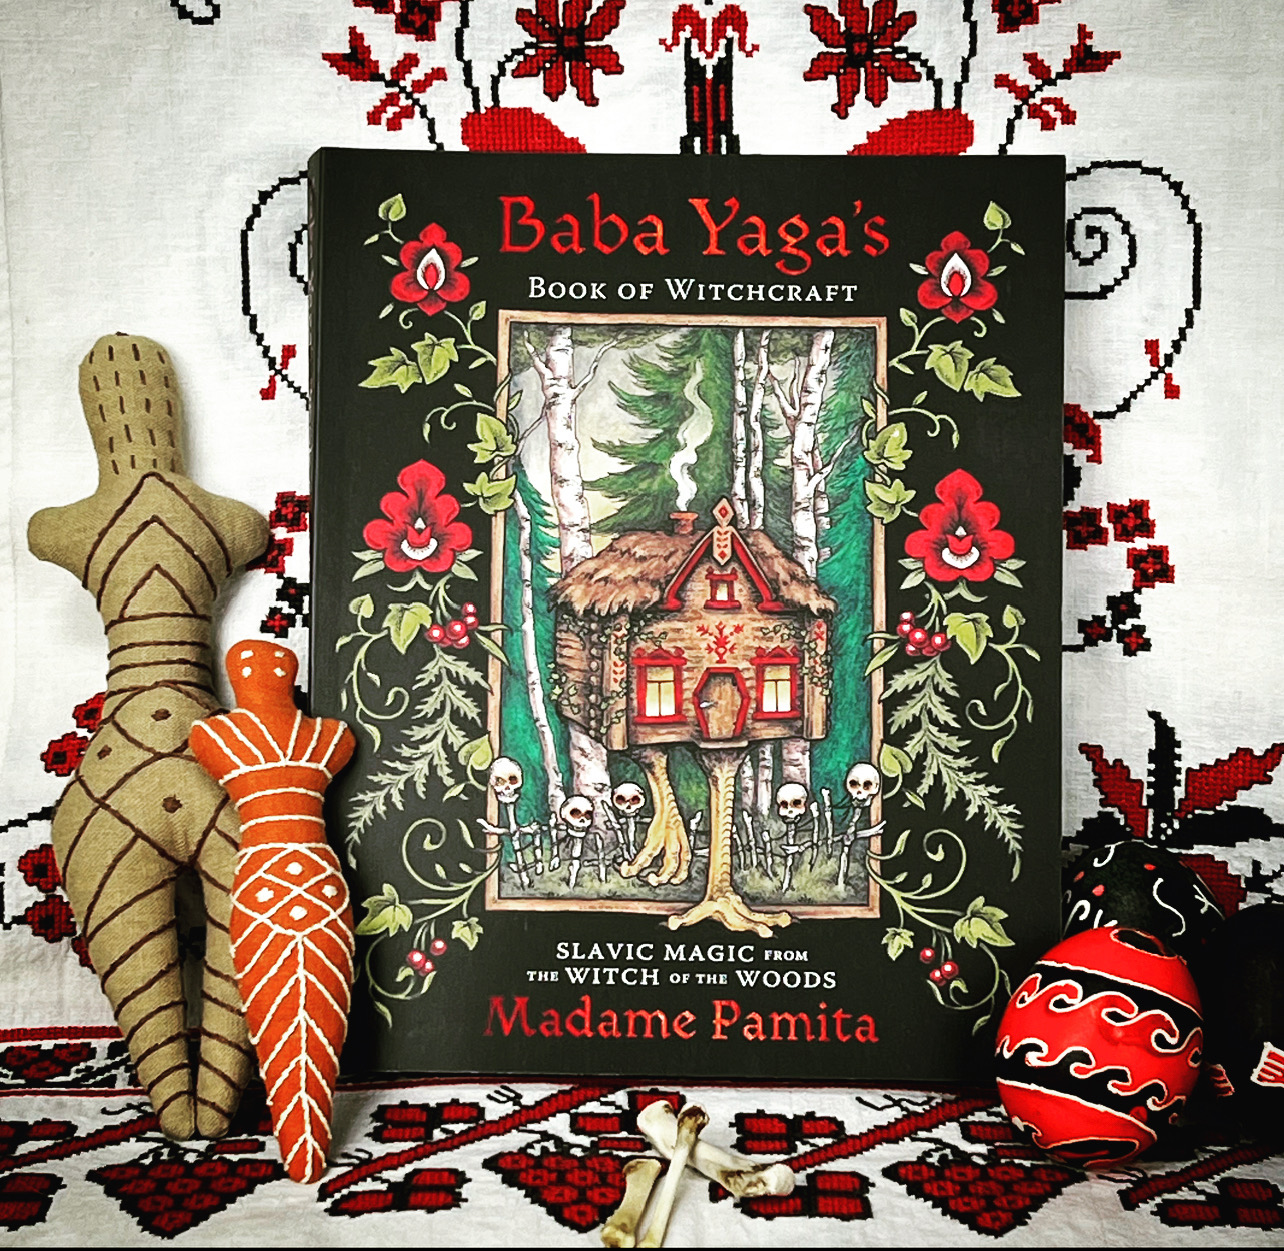 Baba Yaga's Book of Witchcraft